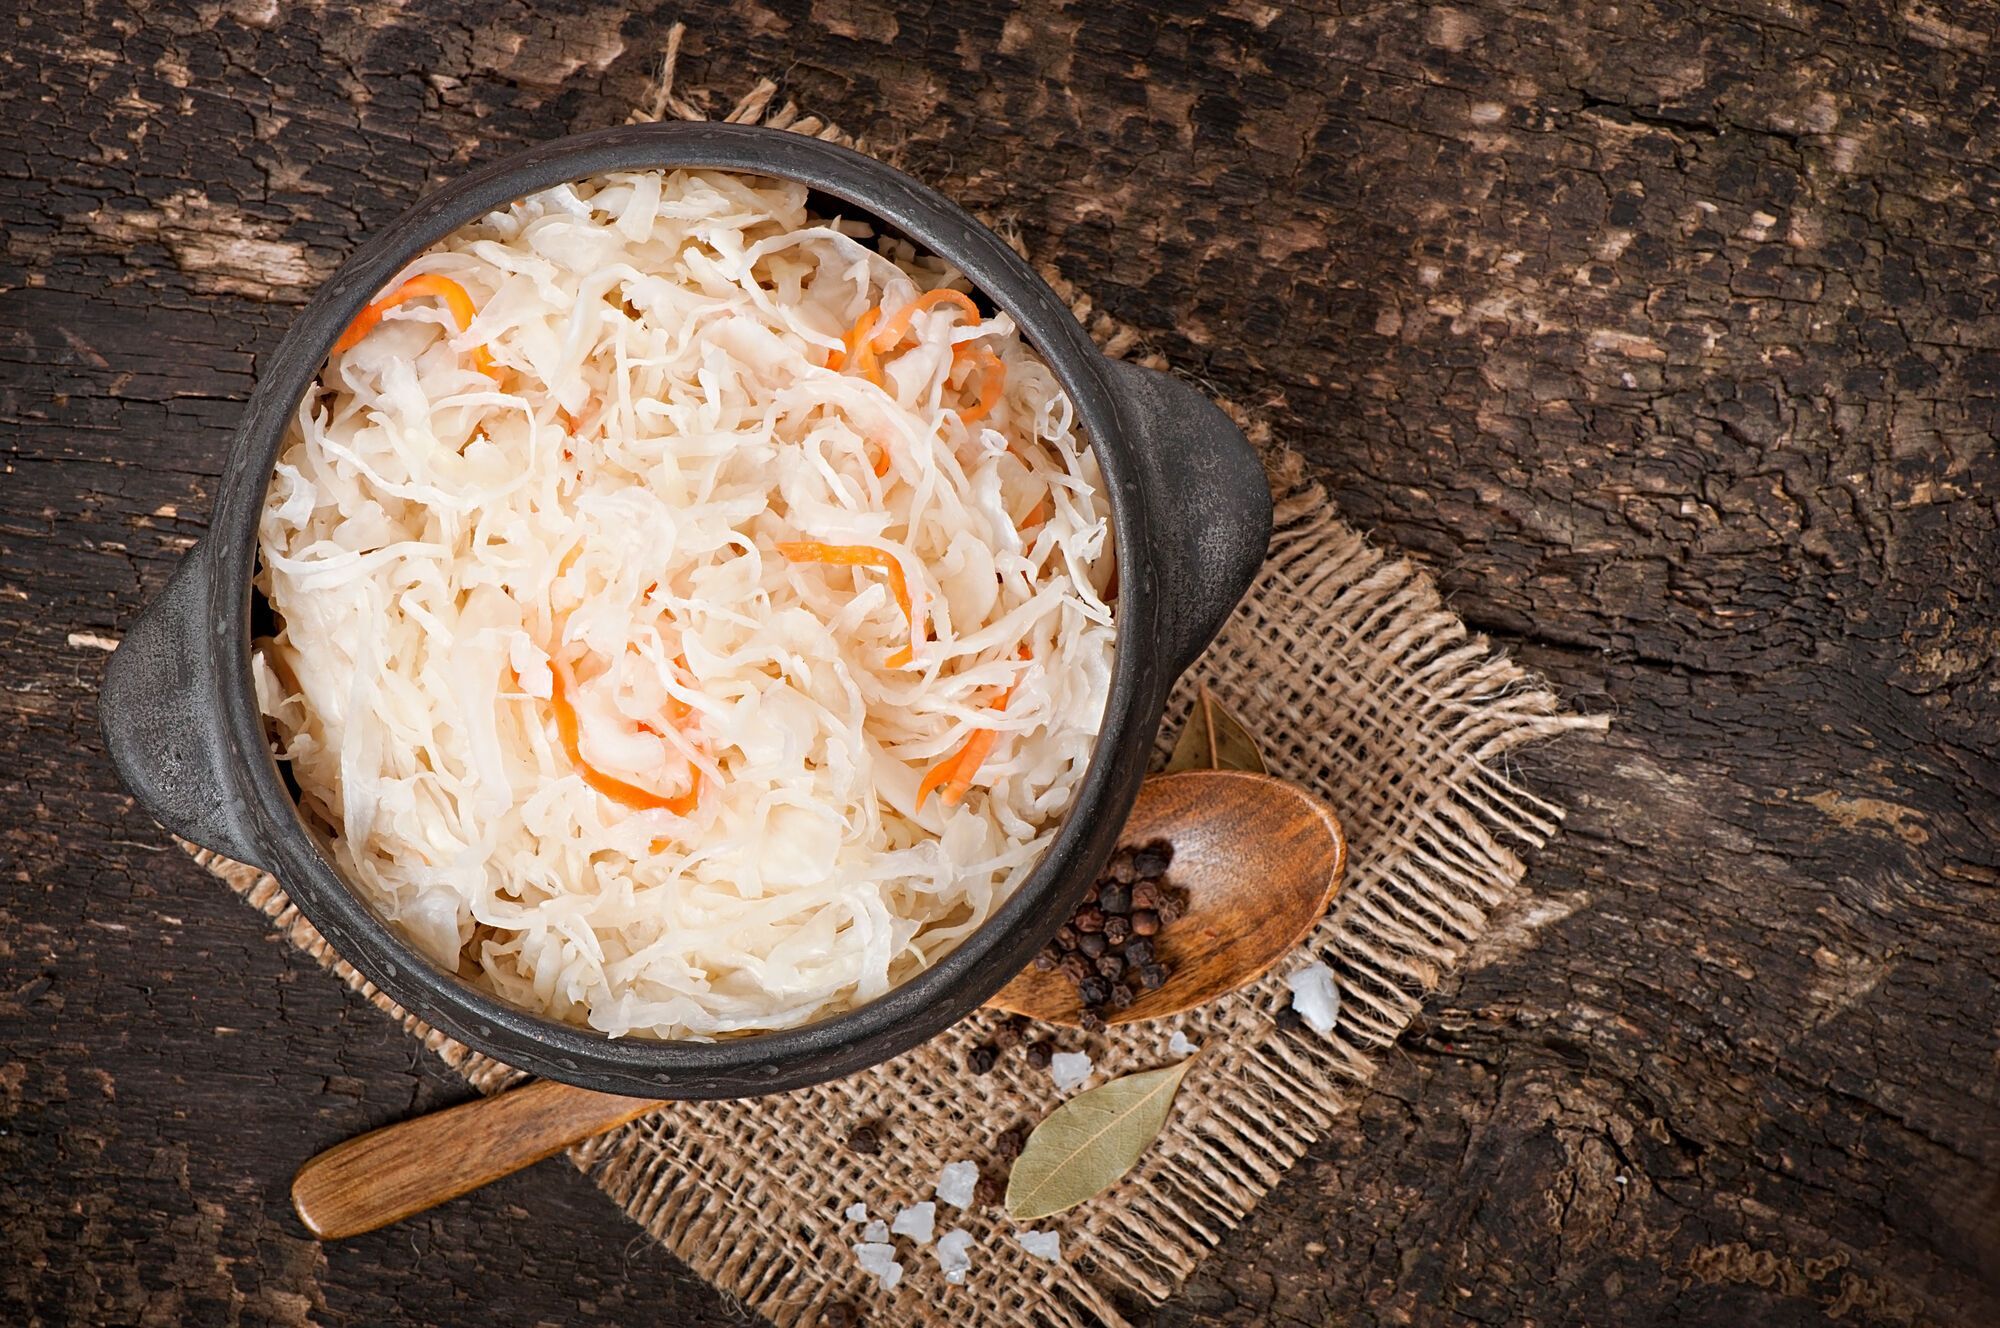 What dishes are not suitable for cooking sauerkraut: they should not be used